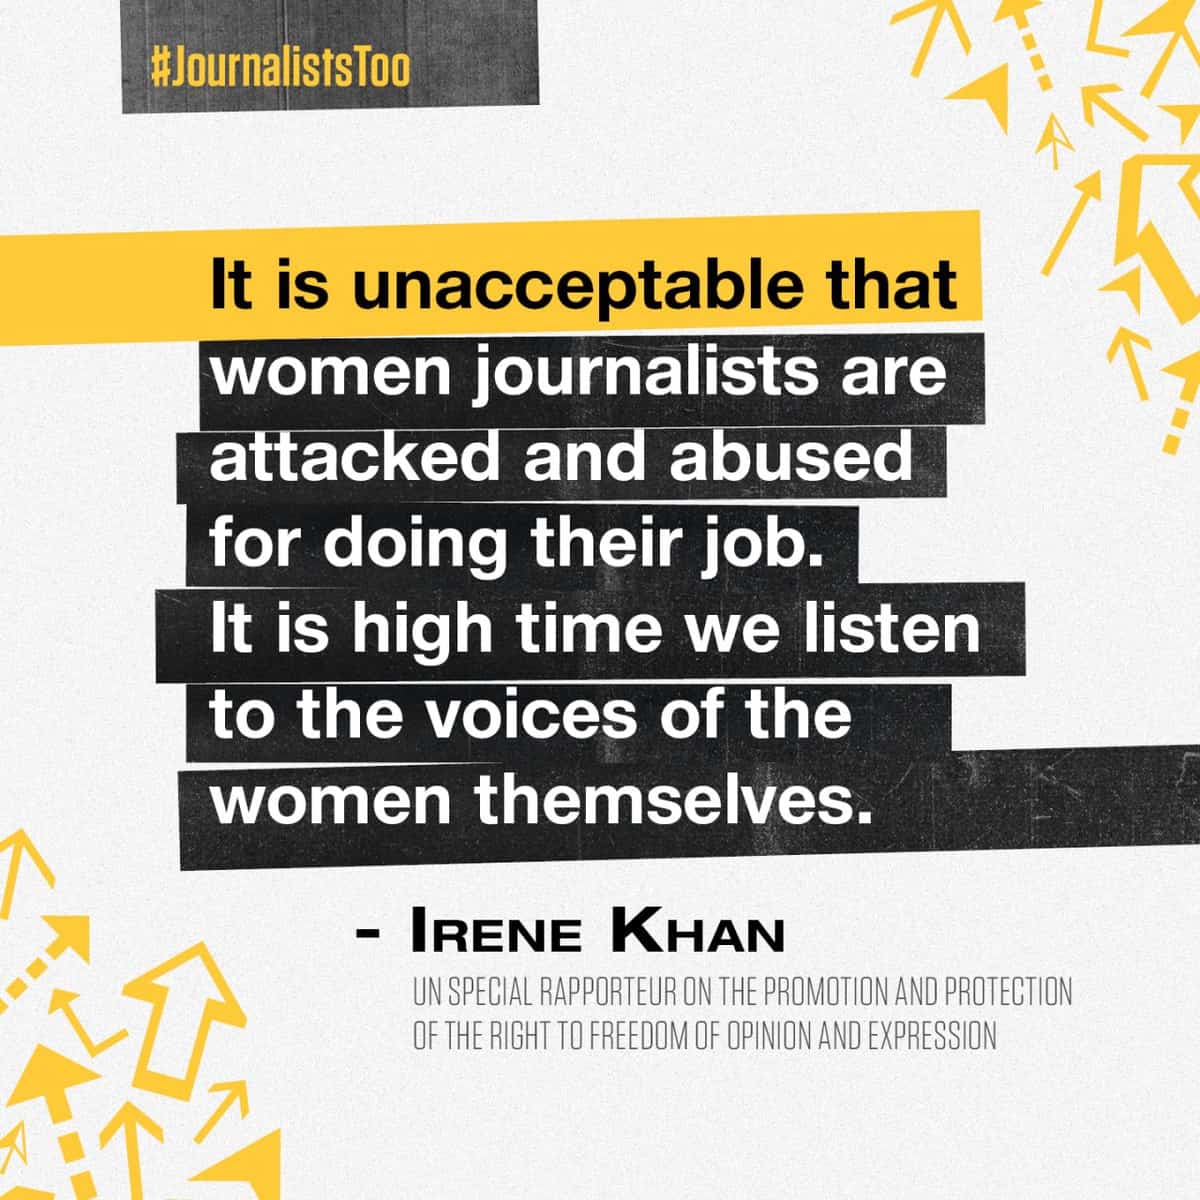 Women journalists face violence and sexualized attacks – UN expert #JournalistsToo  – Women Journalists Speak Out